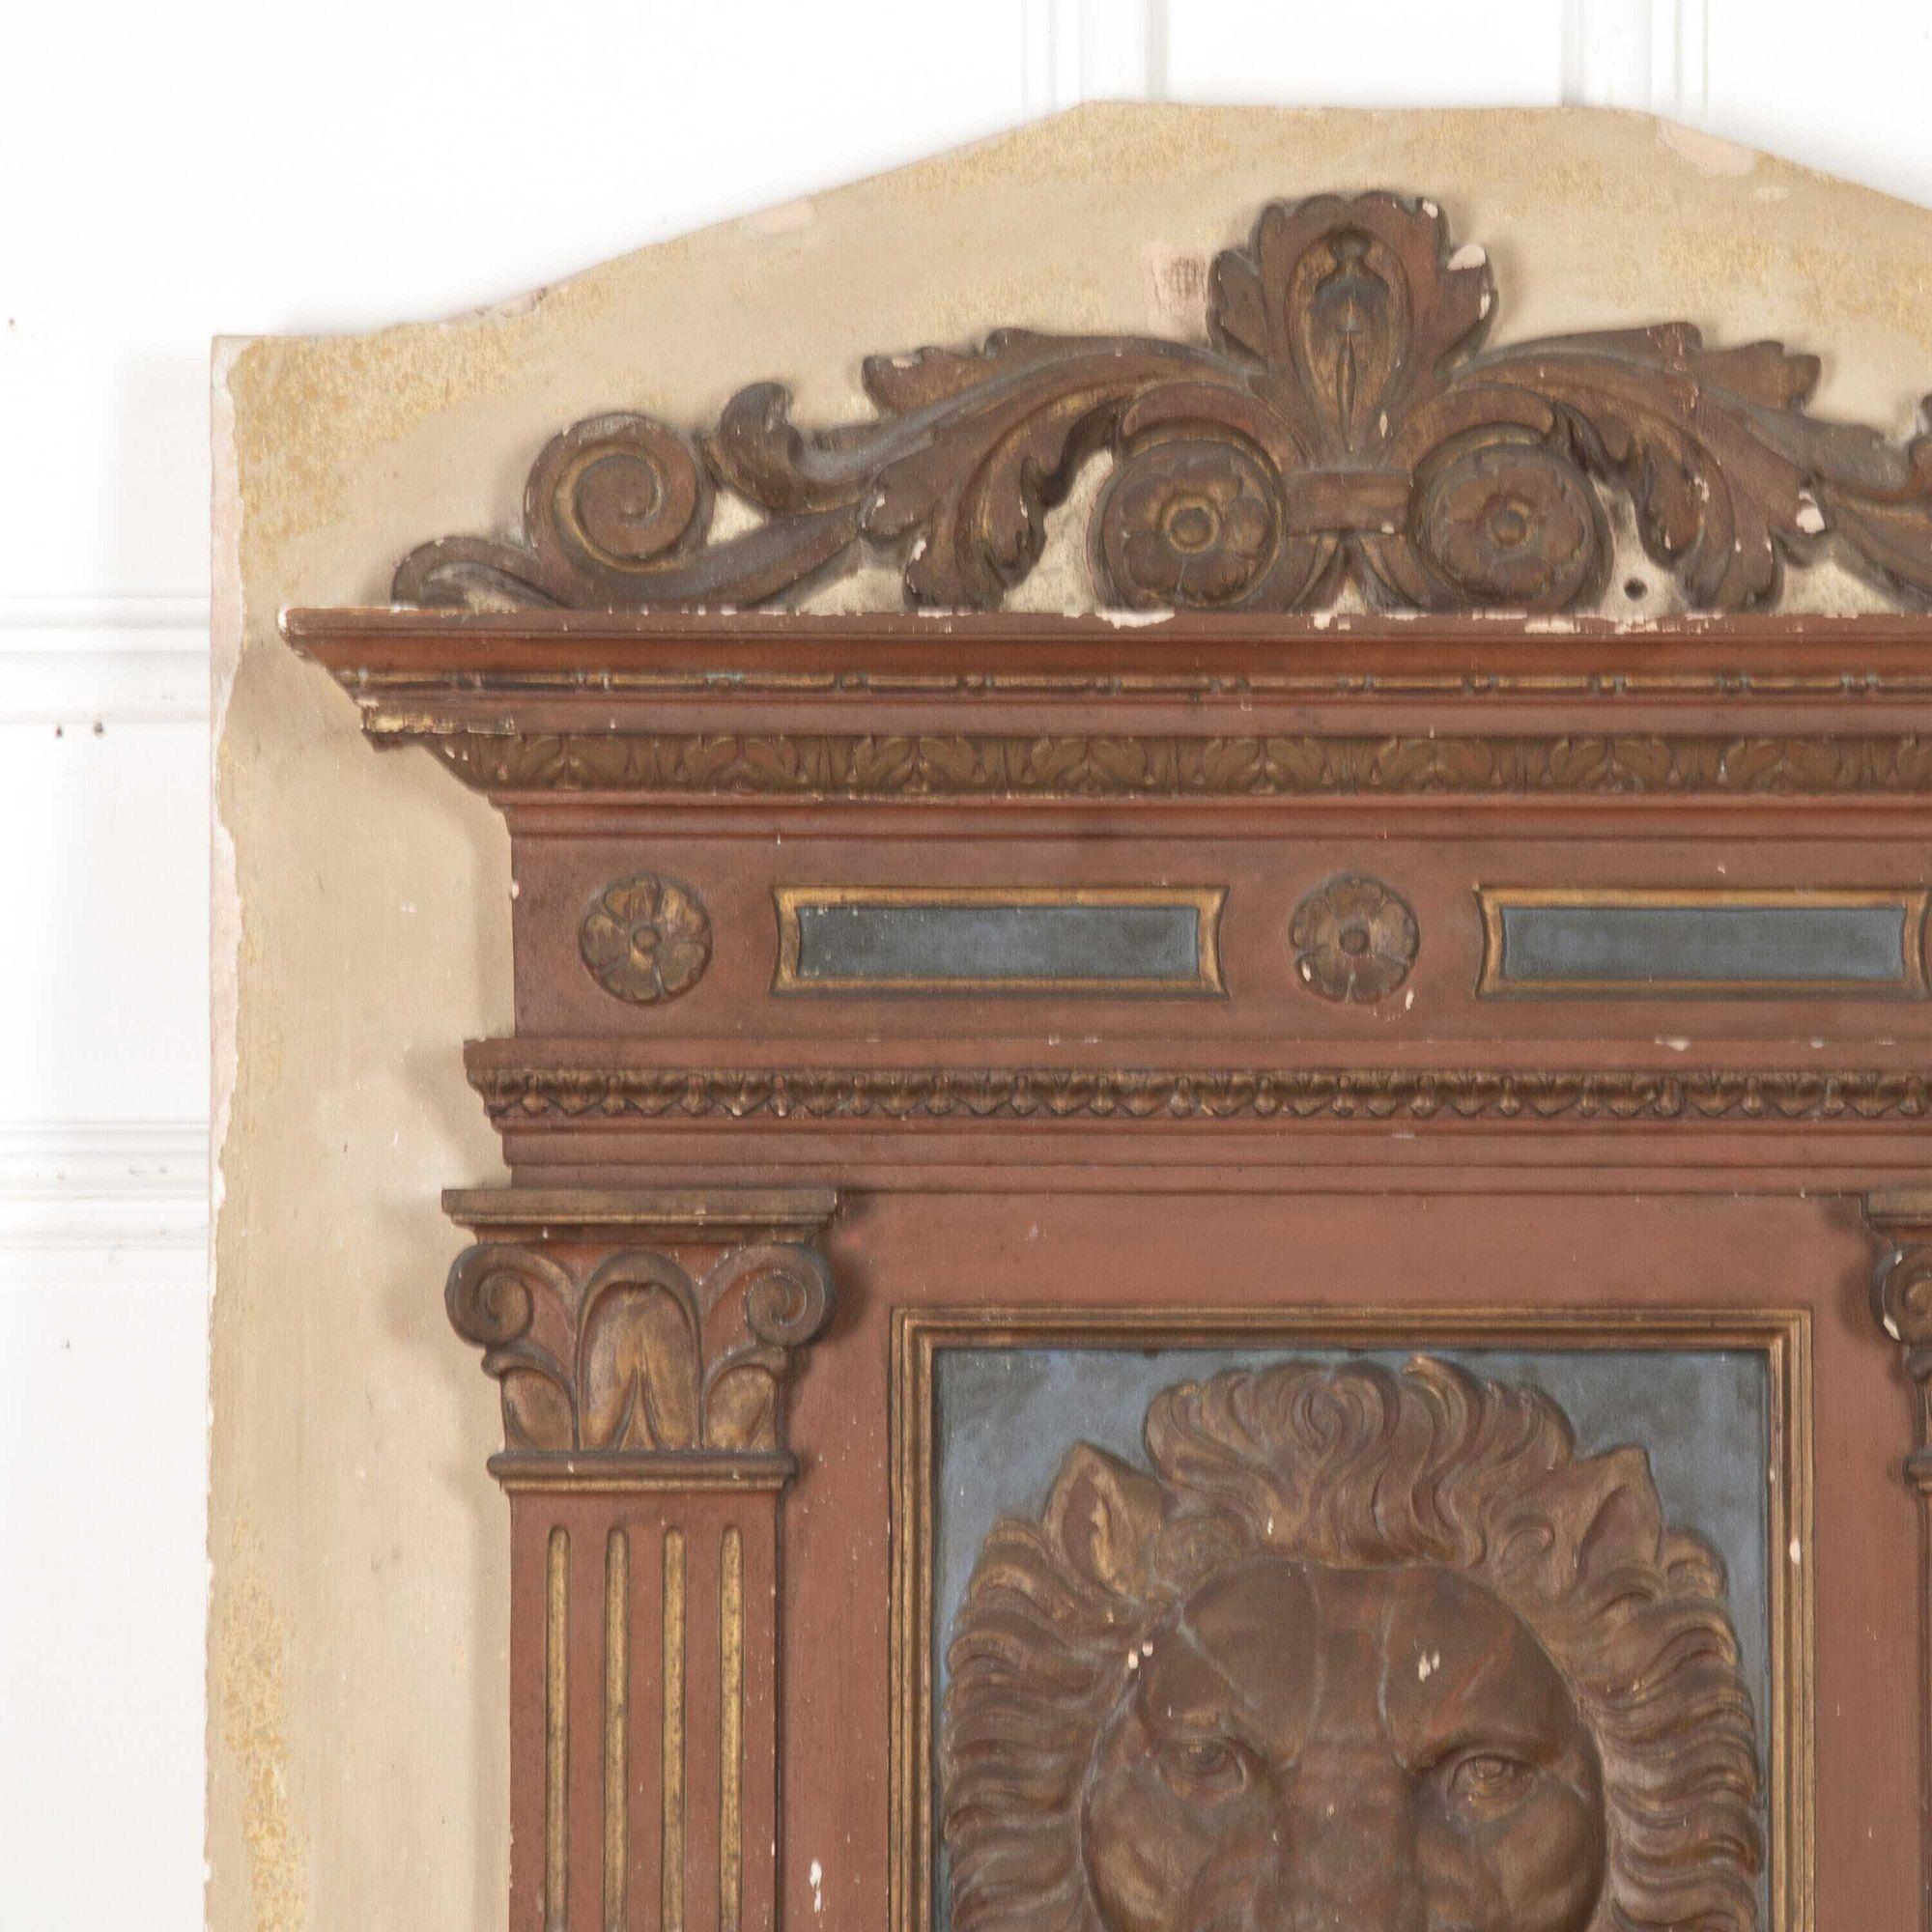 Superb Italian wall fountain. 
Featuring lion head decoration and its original paintwork, this fountain is extremely eye-catching. It has its original copper reservoir and copper fittings to the rear. This piece would have originally been mounted